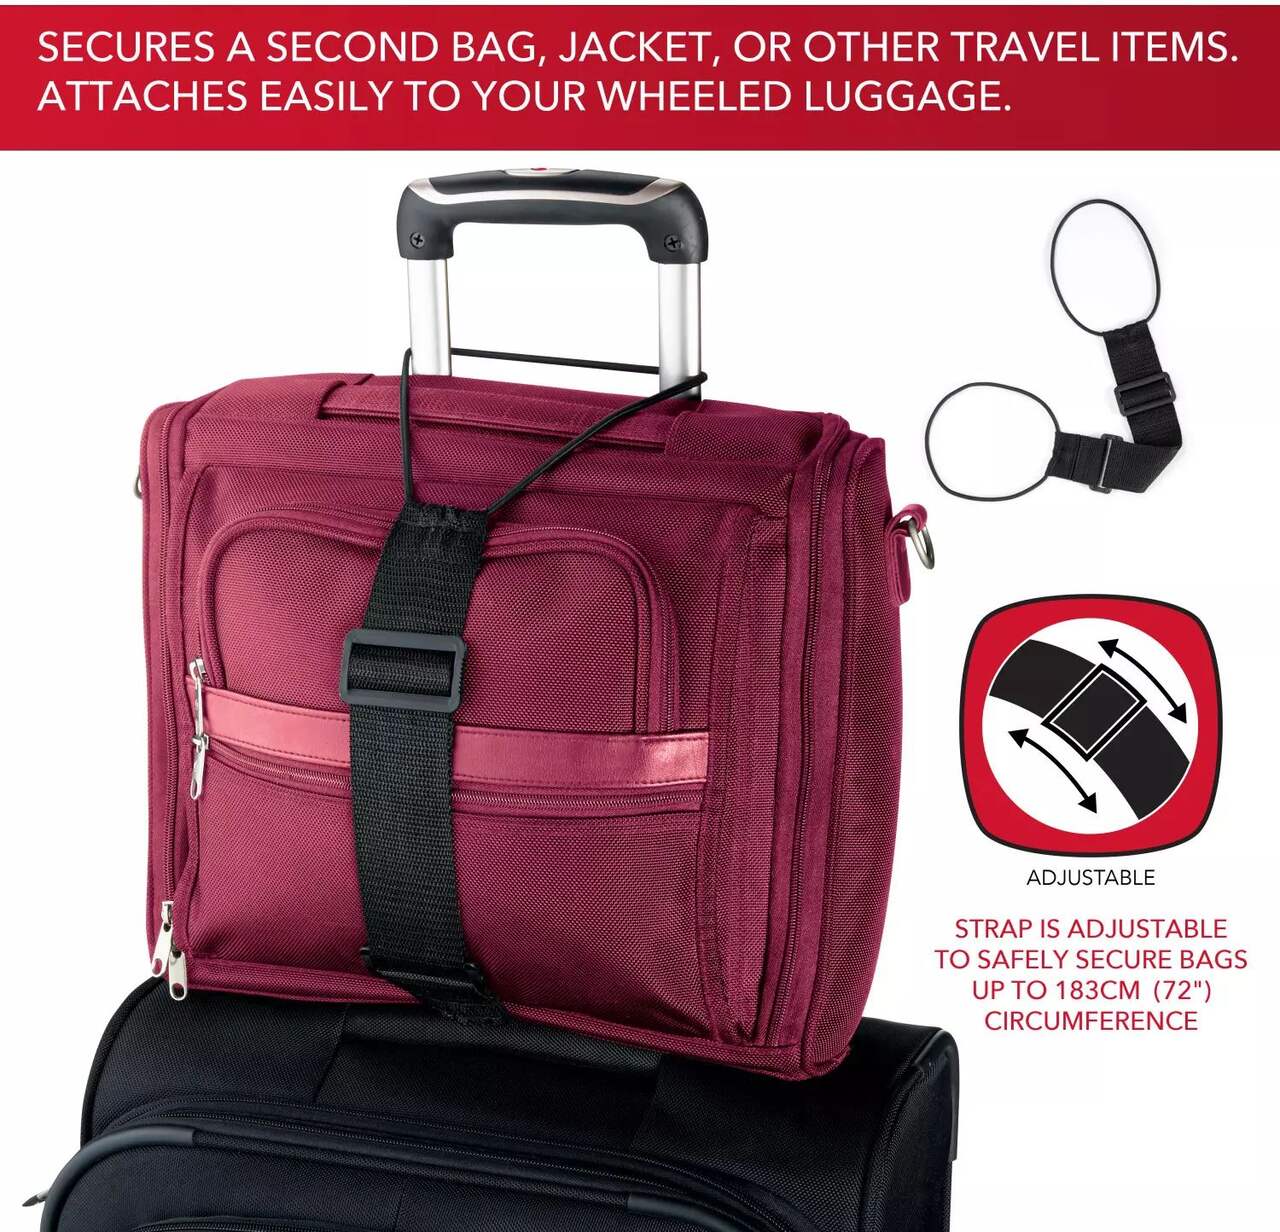 Adjustable Elastic Mini Carry On Luggage Strap Carrier With Bungee Belts  Ideal For Travel Security And Carry On From Cookfurnace, $11.04